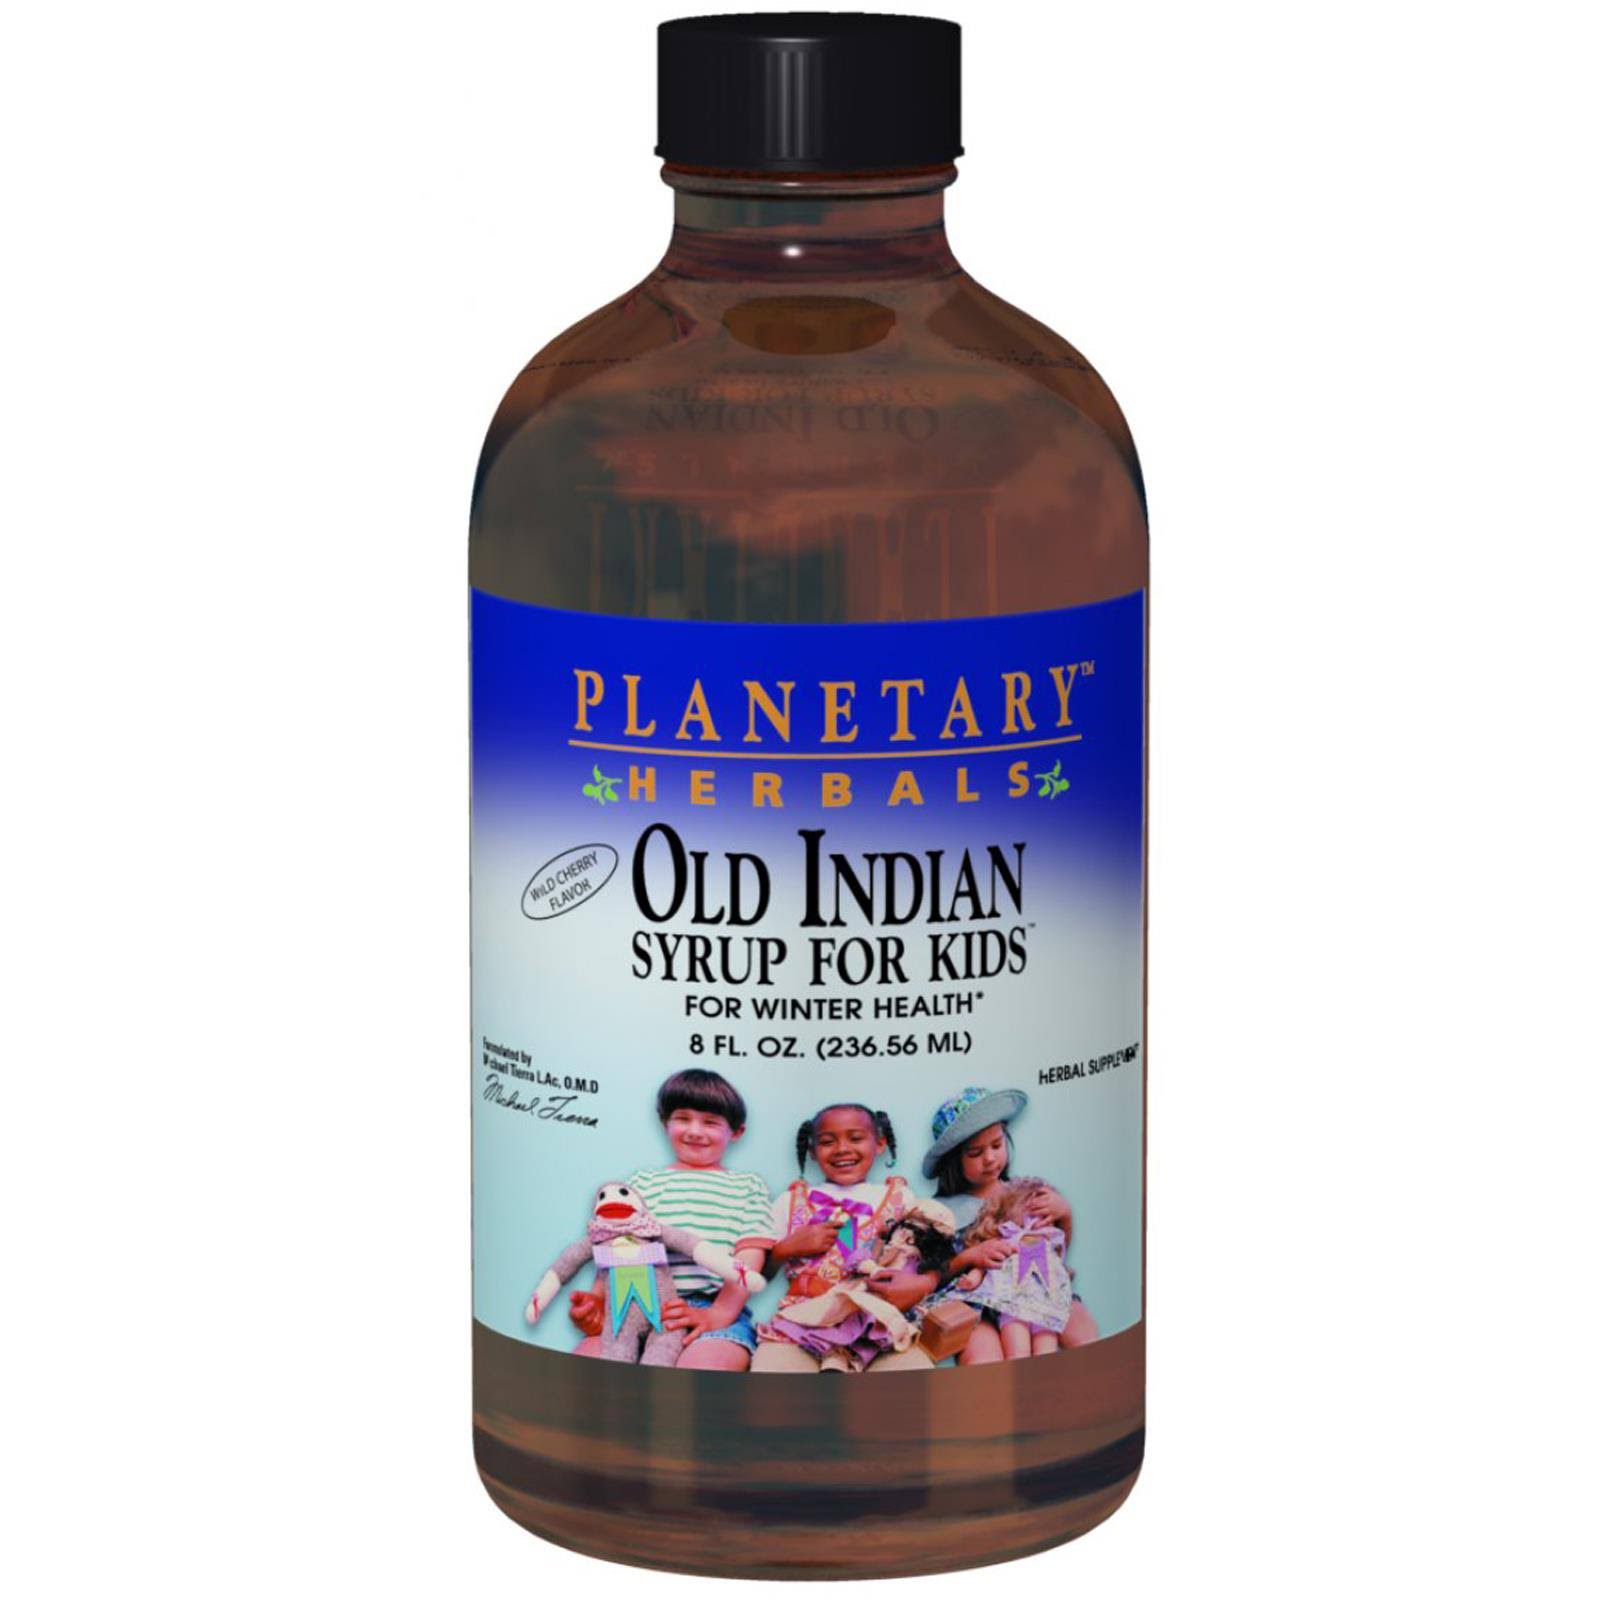 Planetary Herbals Old Indian Syrup for Kids - 4 fl oz